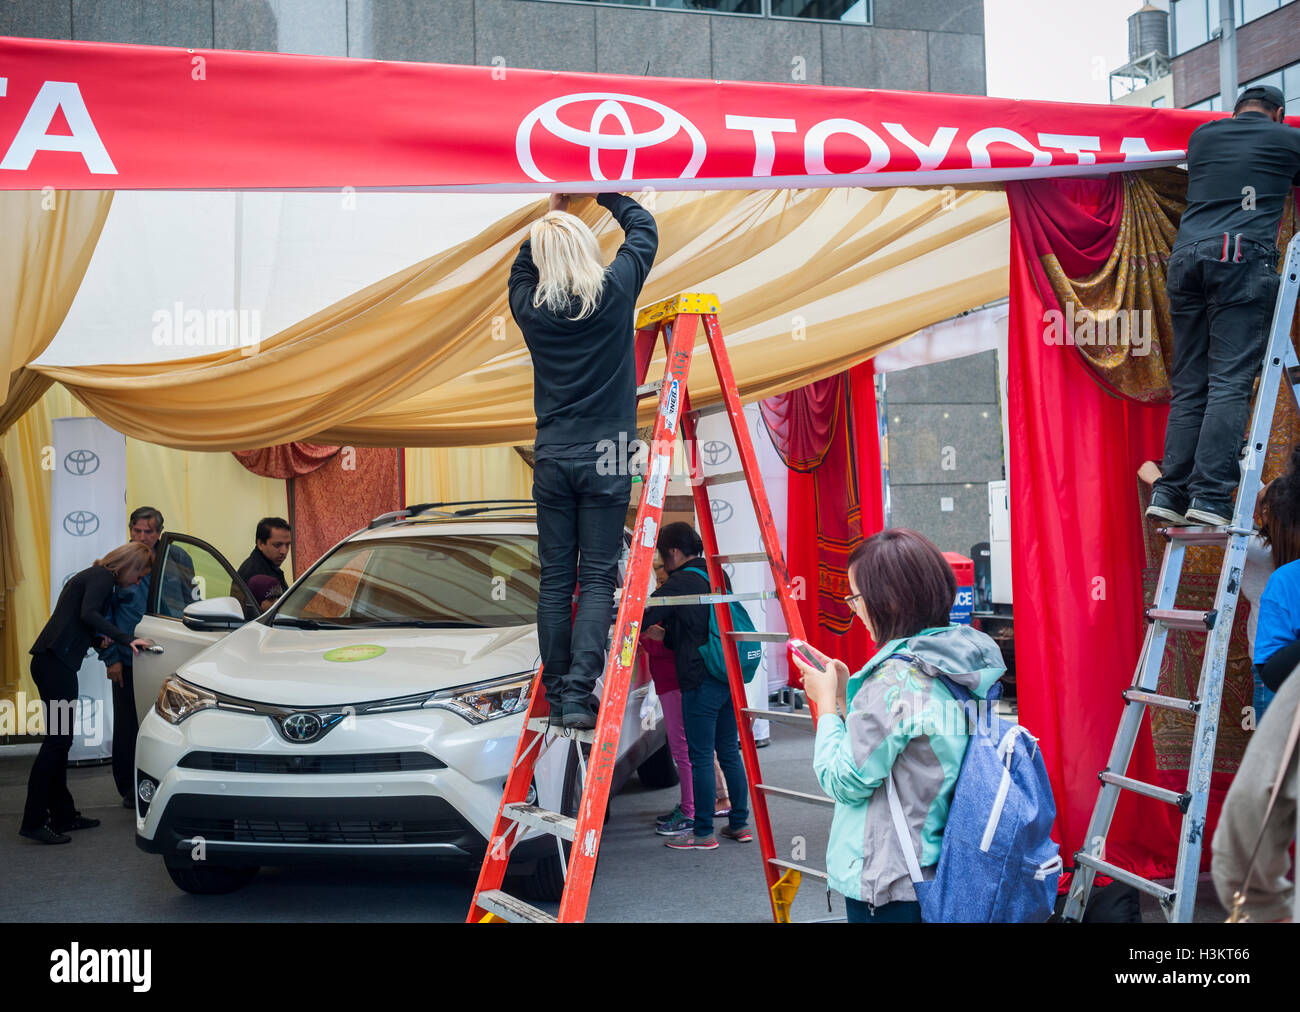 A Toyota promotional event at a street fair in New York on Sunday, October 2, 2016. New vehicle sales are reported to have fallen to $47 billion in September, 0.3% less than the same time last year.  (© Richard B. Levine) Stock Photo